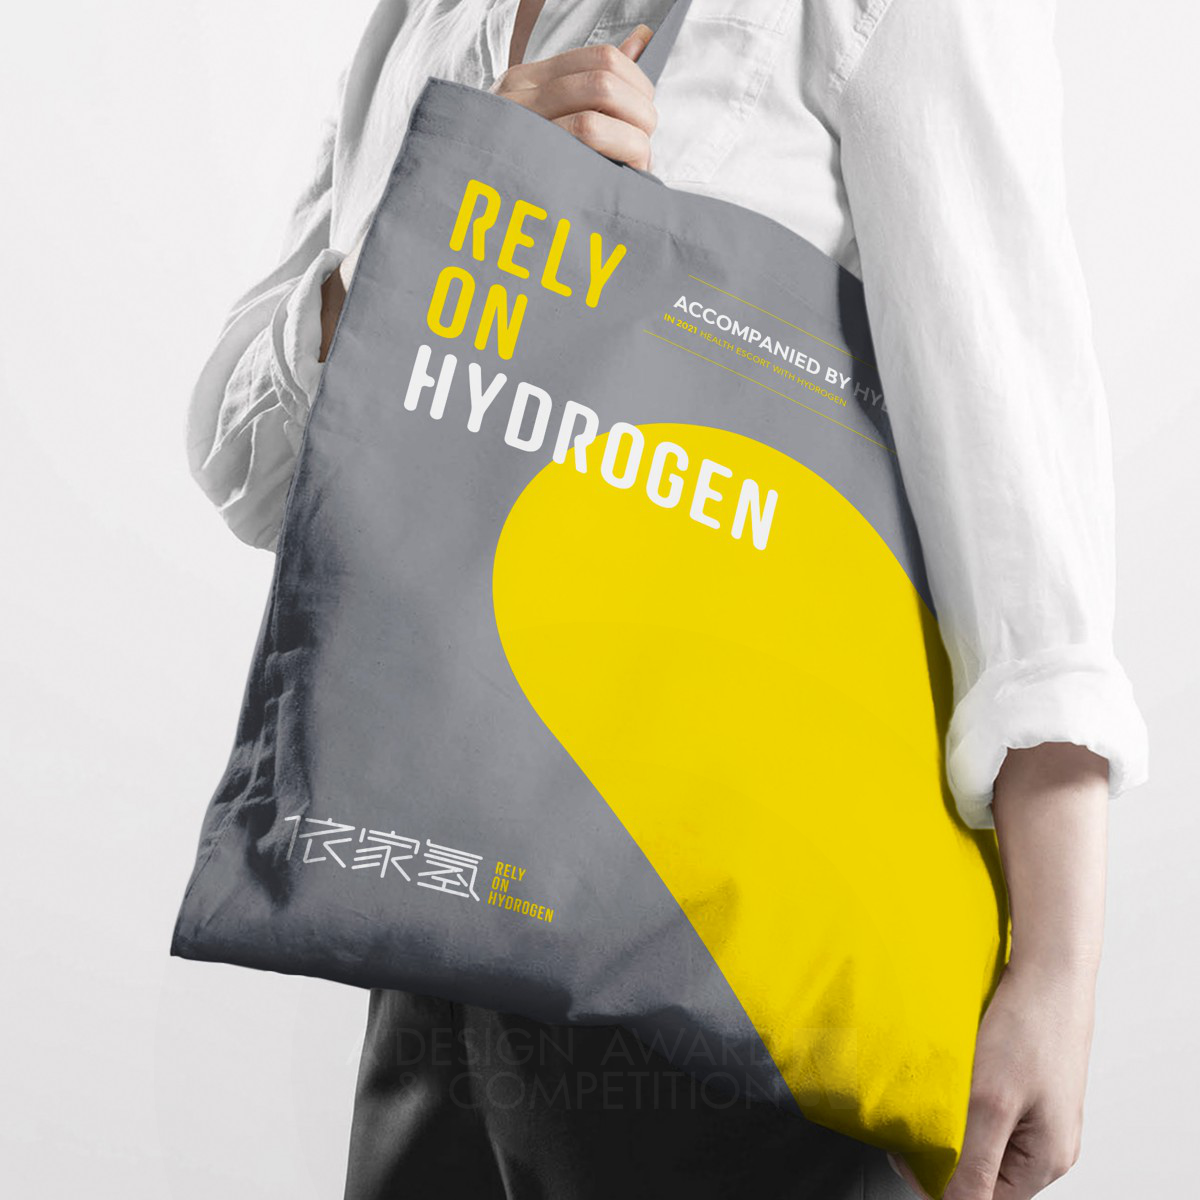 Rely on Hydrogen Corporate Identity